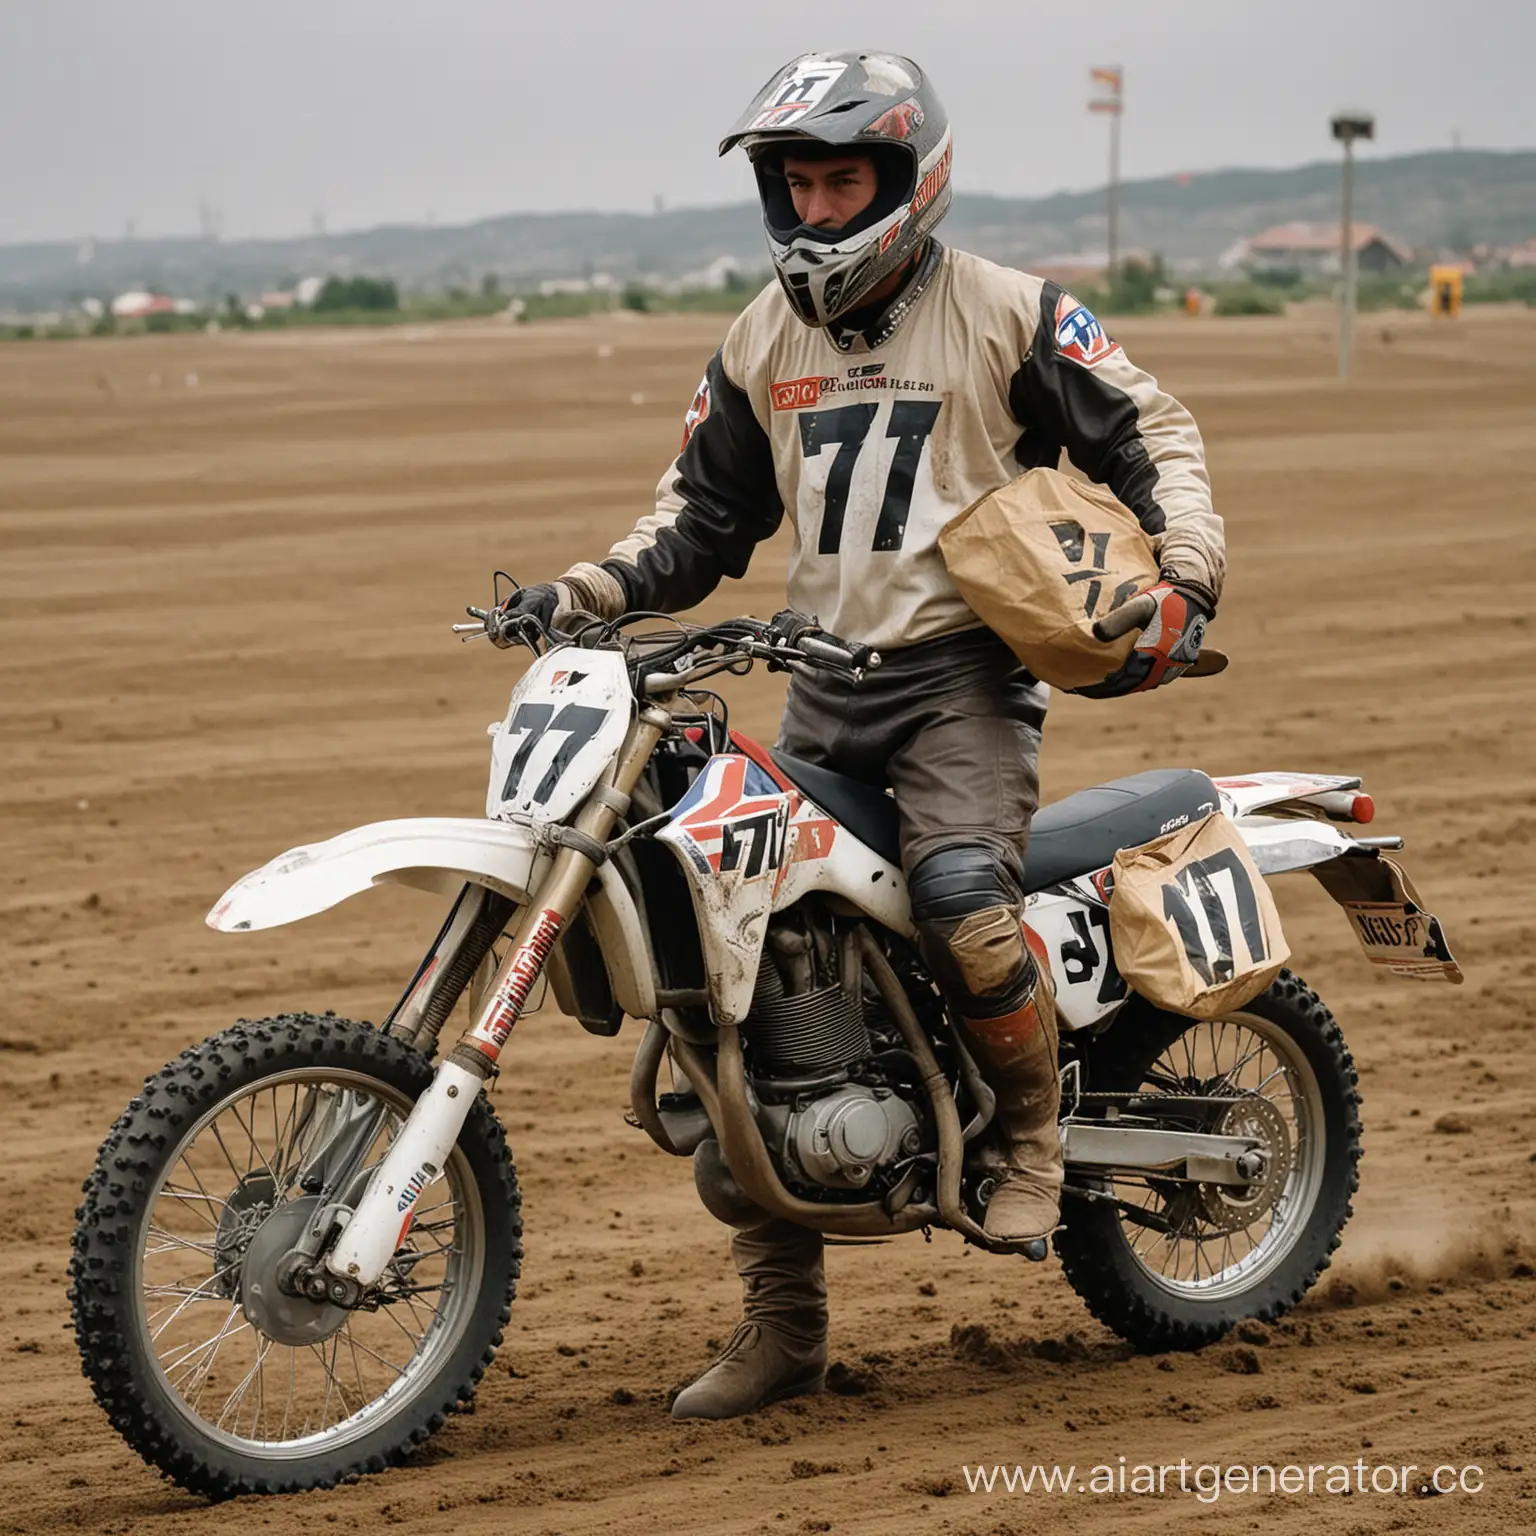 Motocross-Motorcyclist-Delivering-Mail-with-Number-77-Helmet